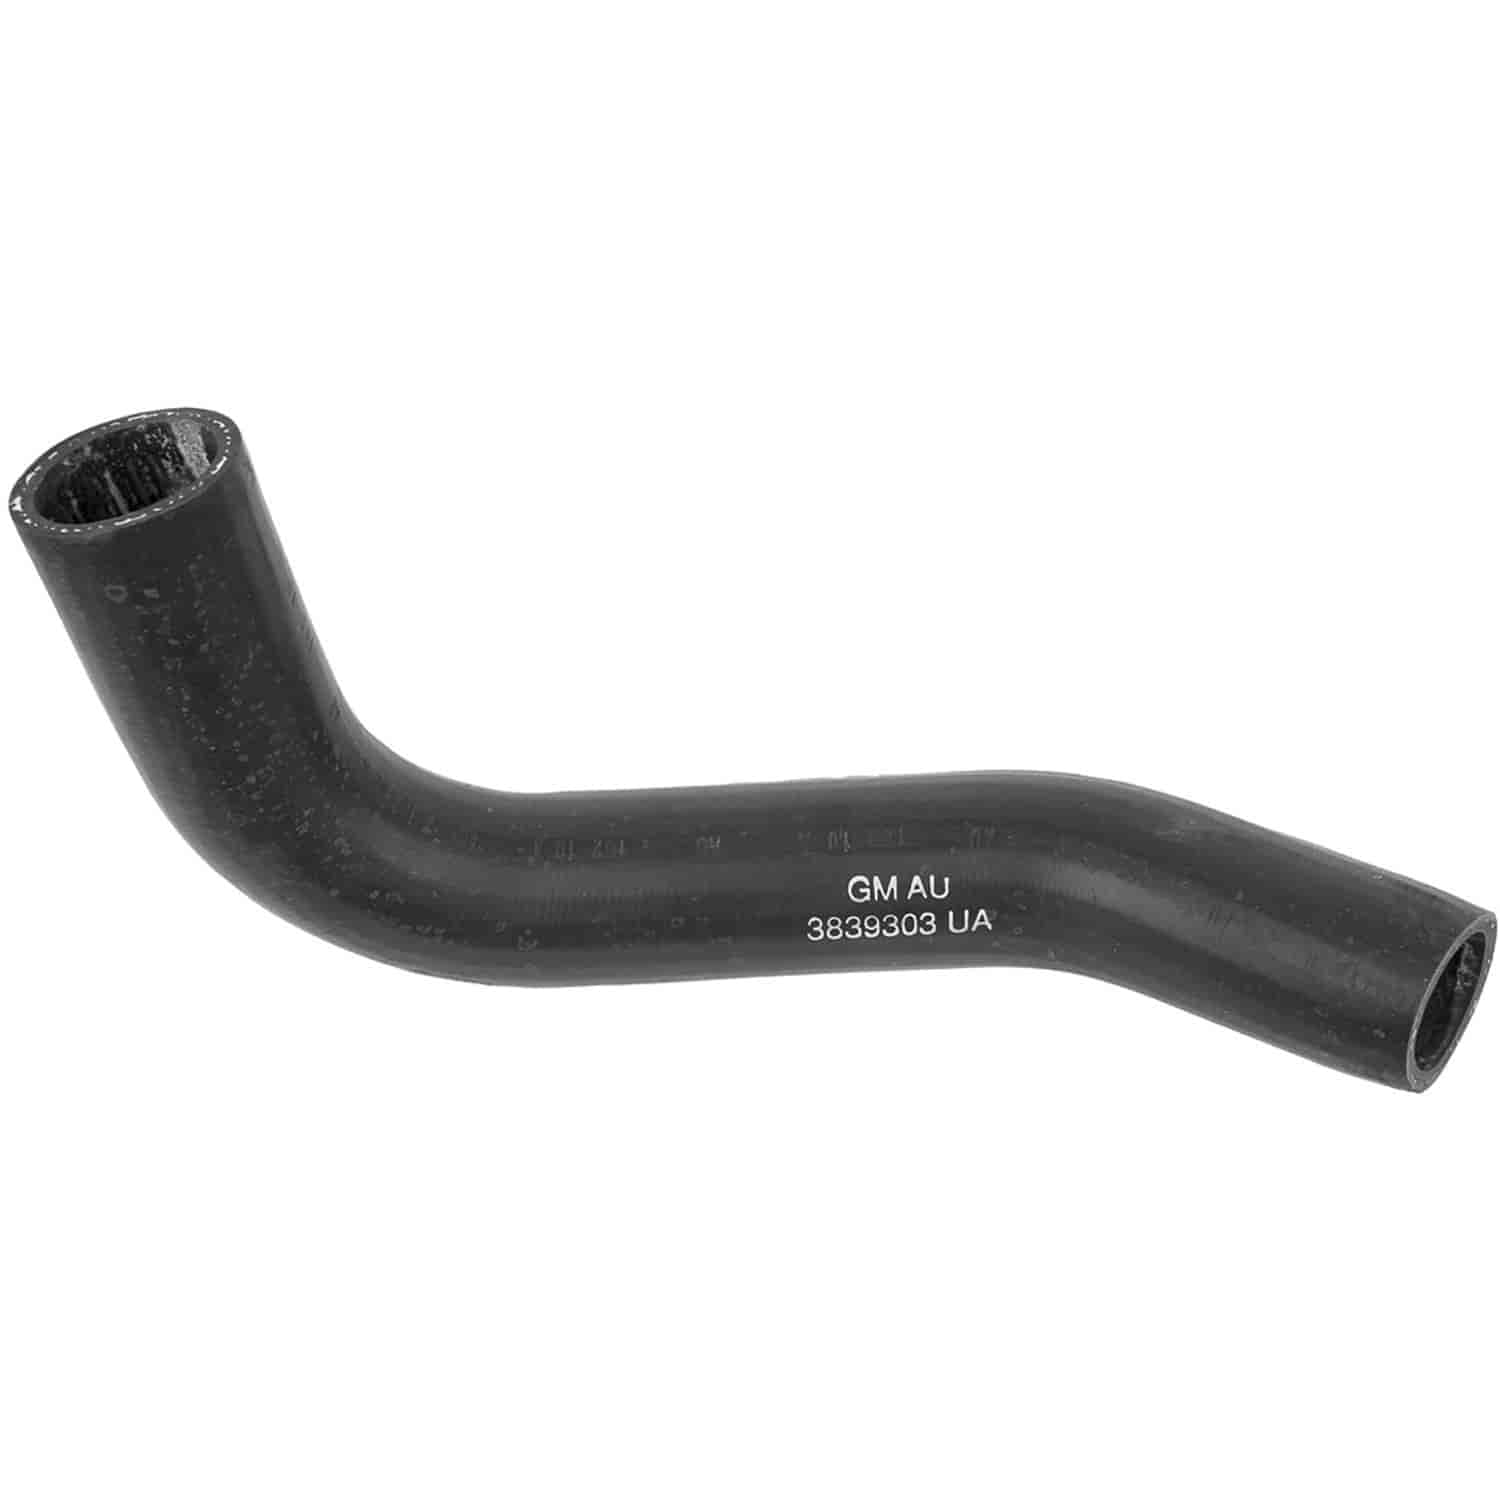 Lower Radiator Hose for 1964-1965 Chevy Chevelle, El Camino Small Block with A/C